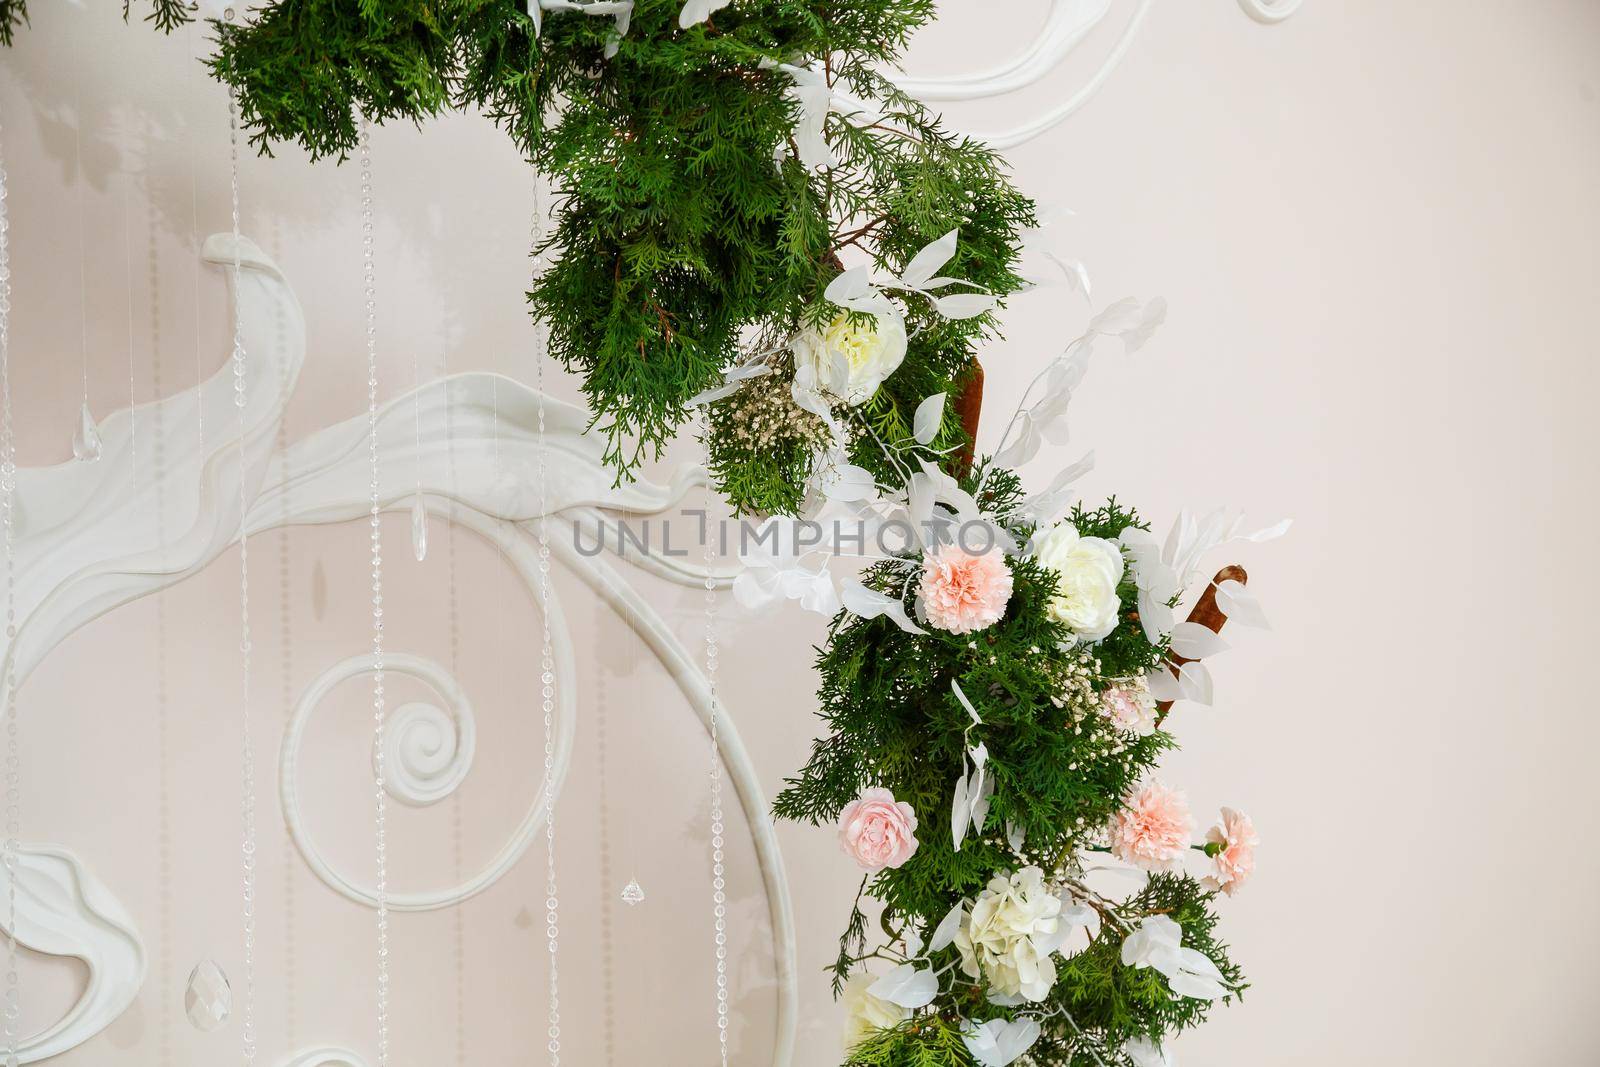 Wedding decor made of flowers and fabric. Beautiful decorations for newlyweds on their wedding day by Dmitrytph